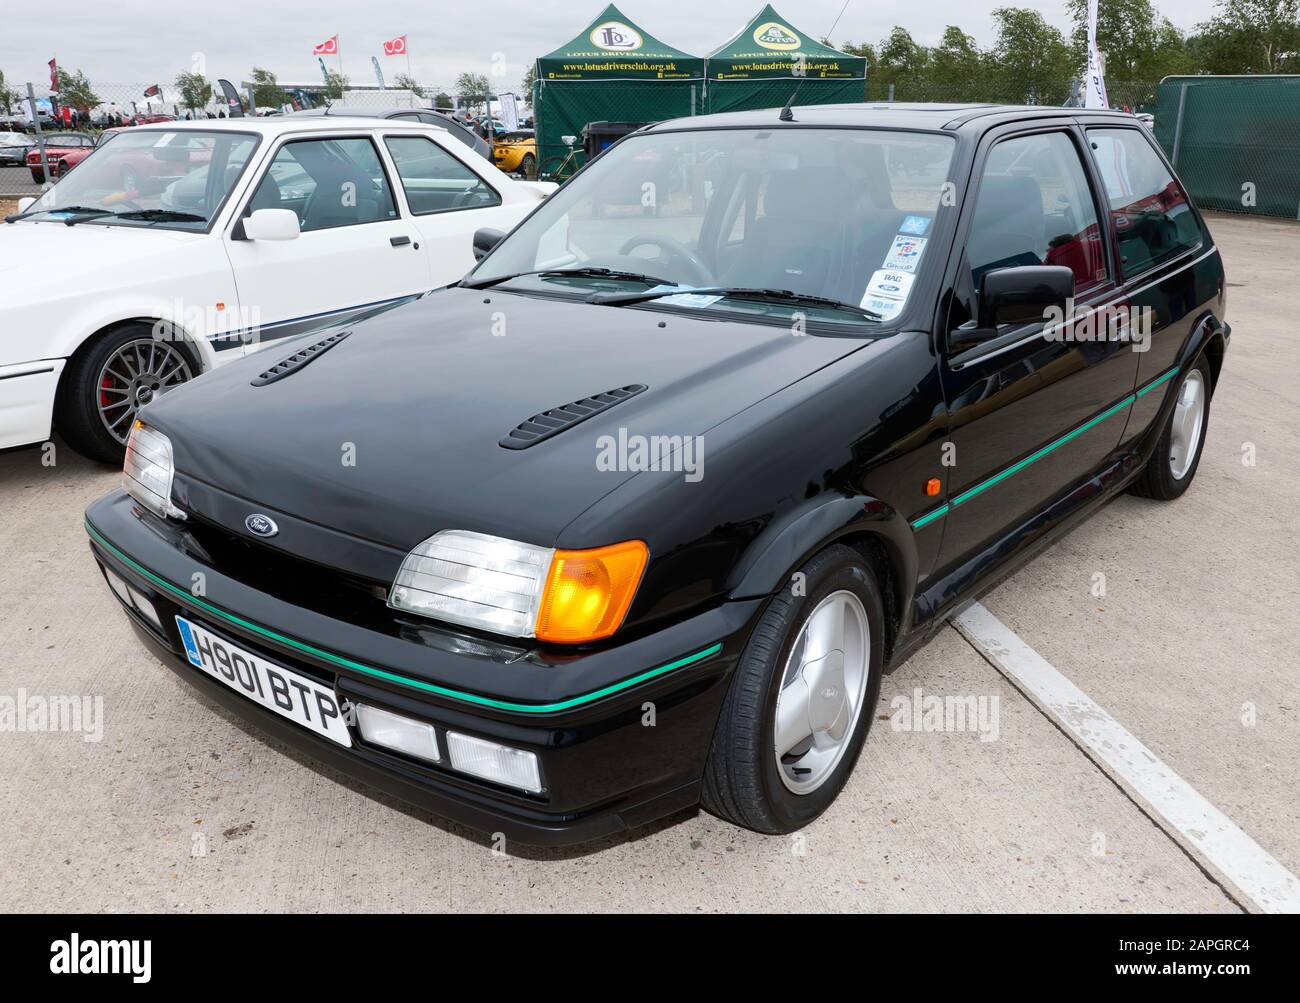 Three-quarter front view of a Black, 1990, Ford Fiesta RS Turbo, on display at the 2019 Silverstone Classic Stock Photo